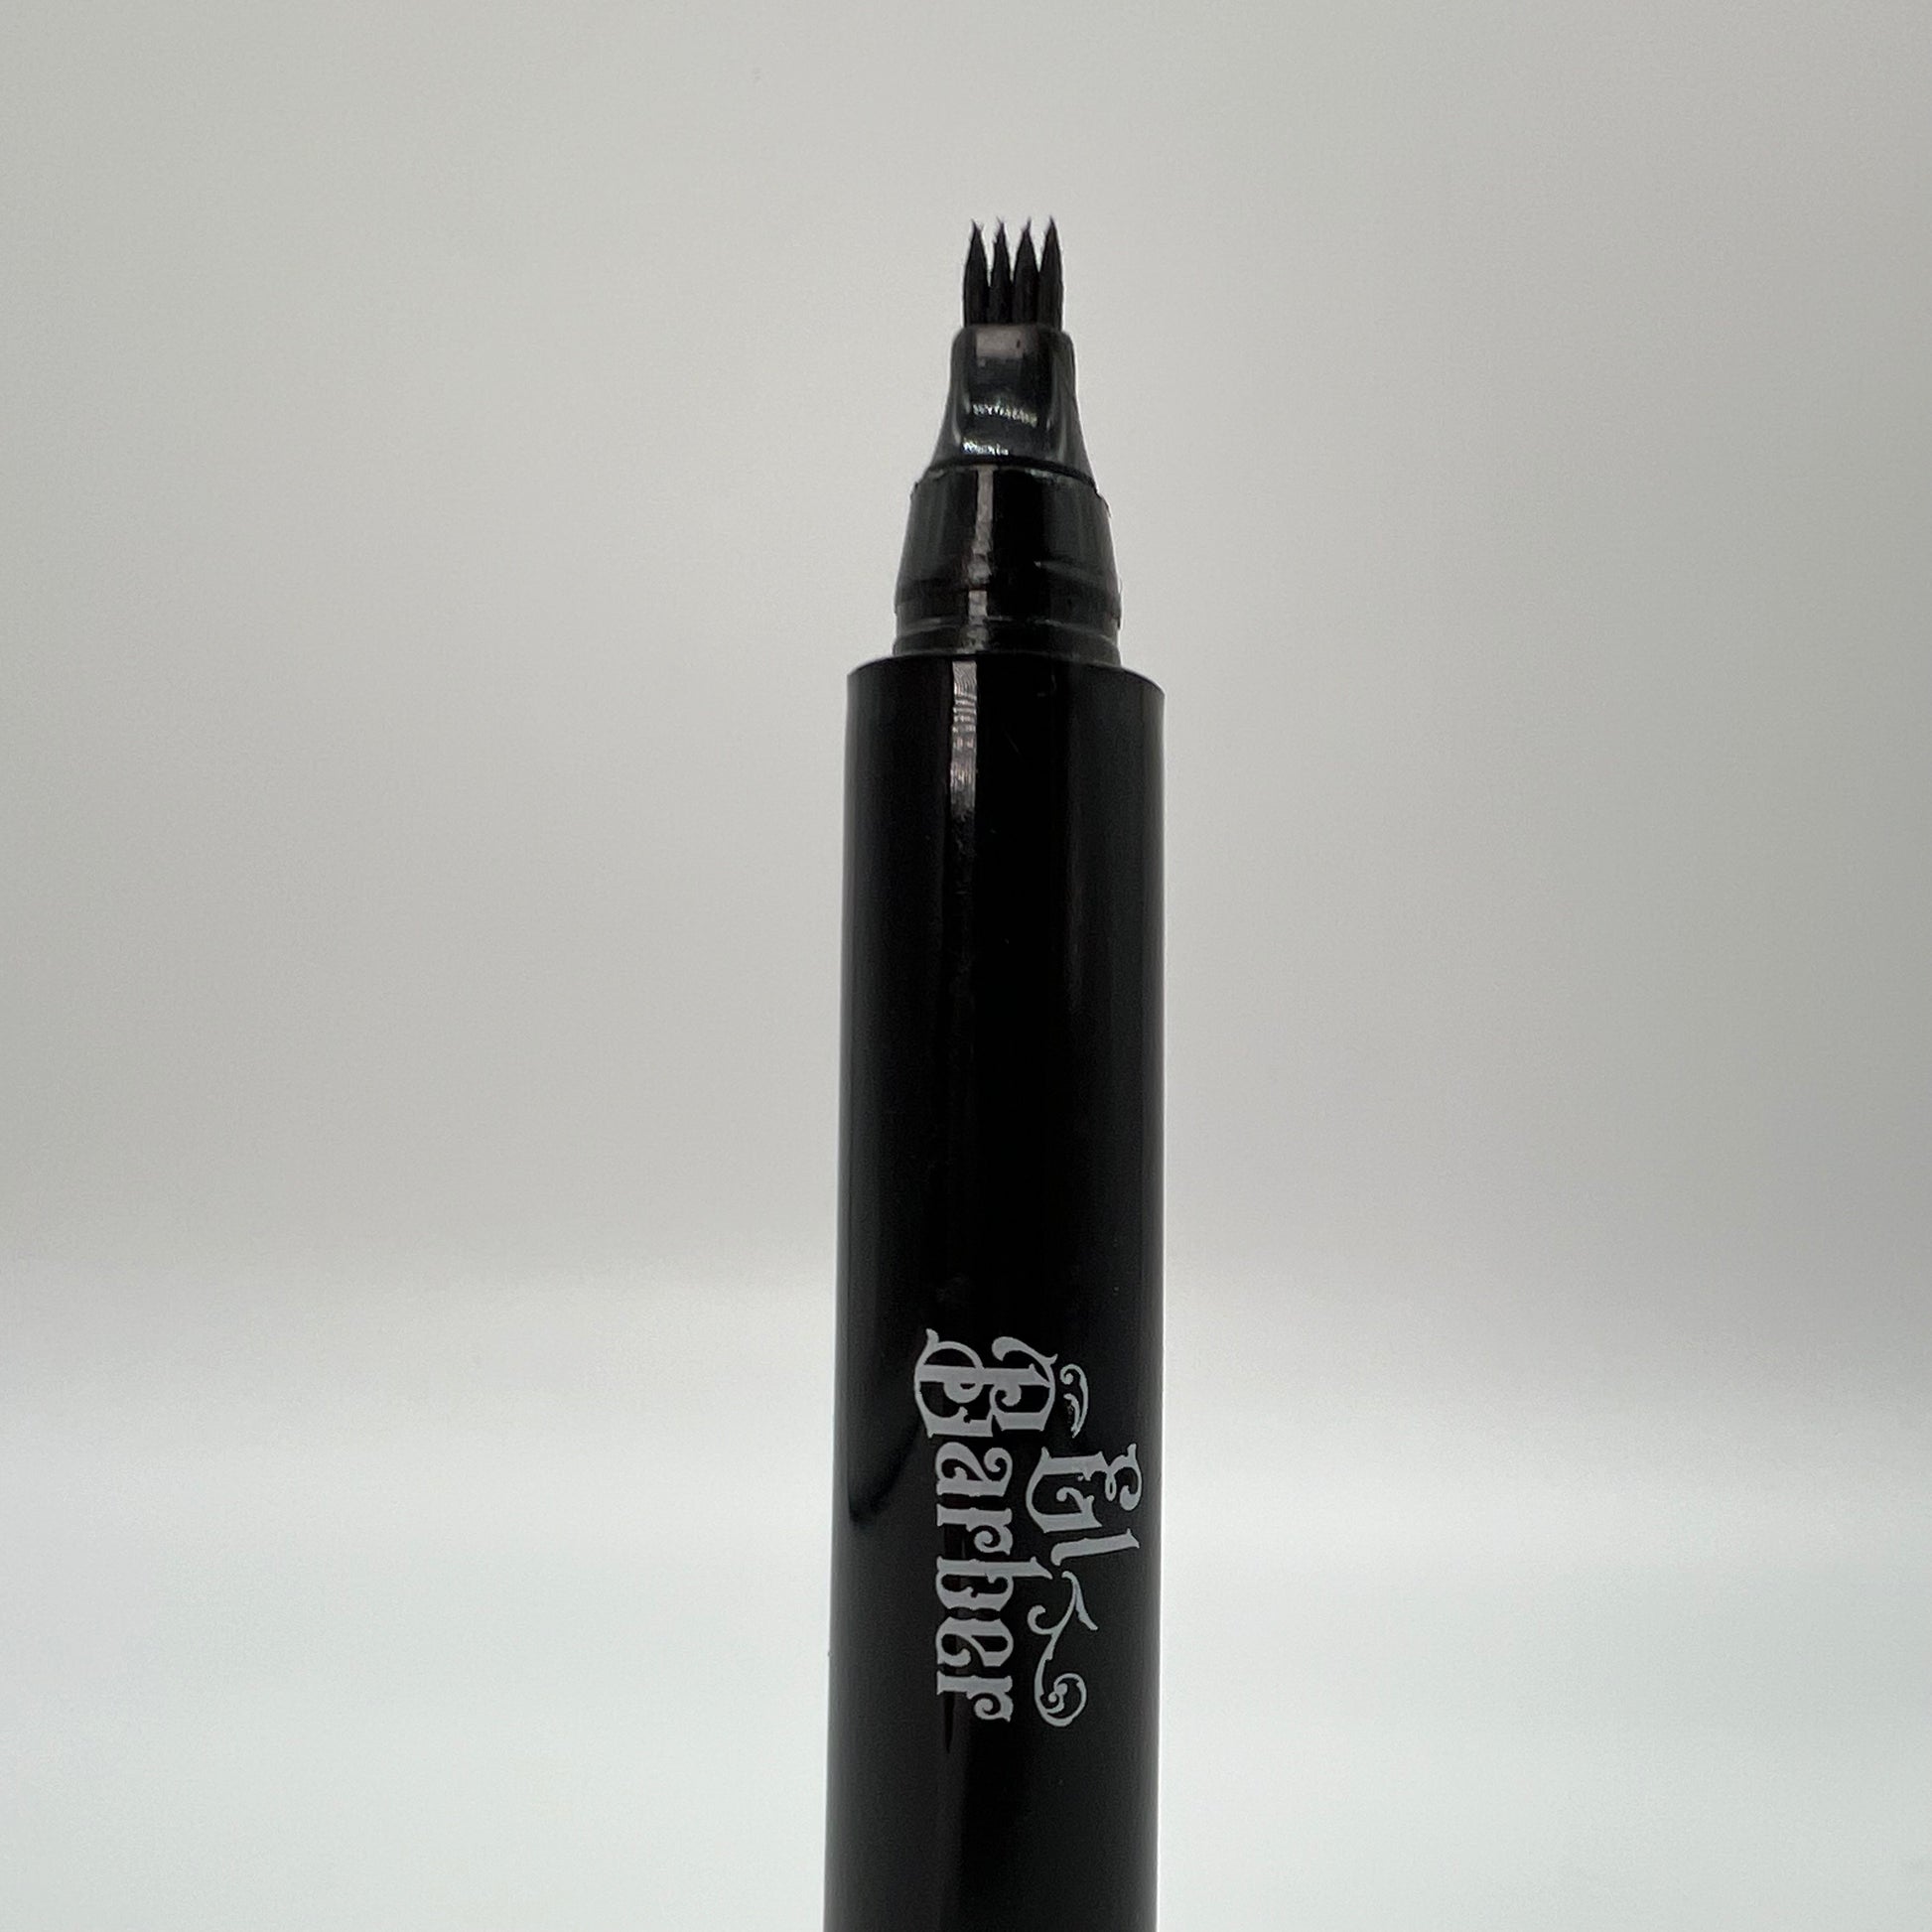 A close up of the Beard Pencil Filler with the El Barber logo being displayed